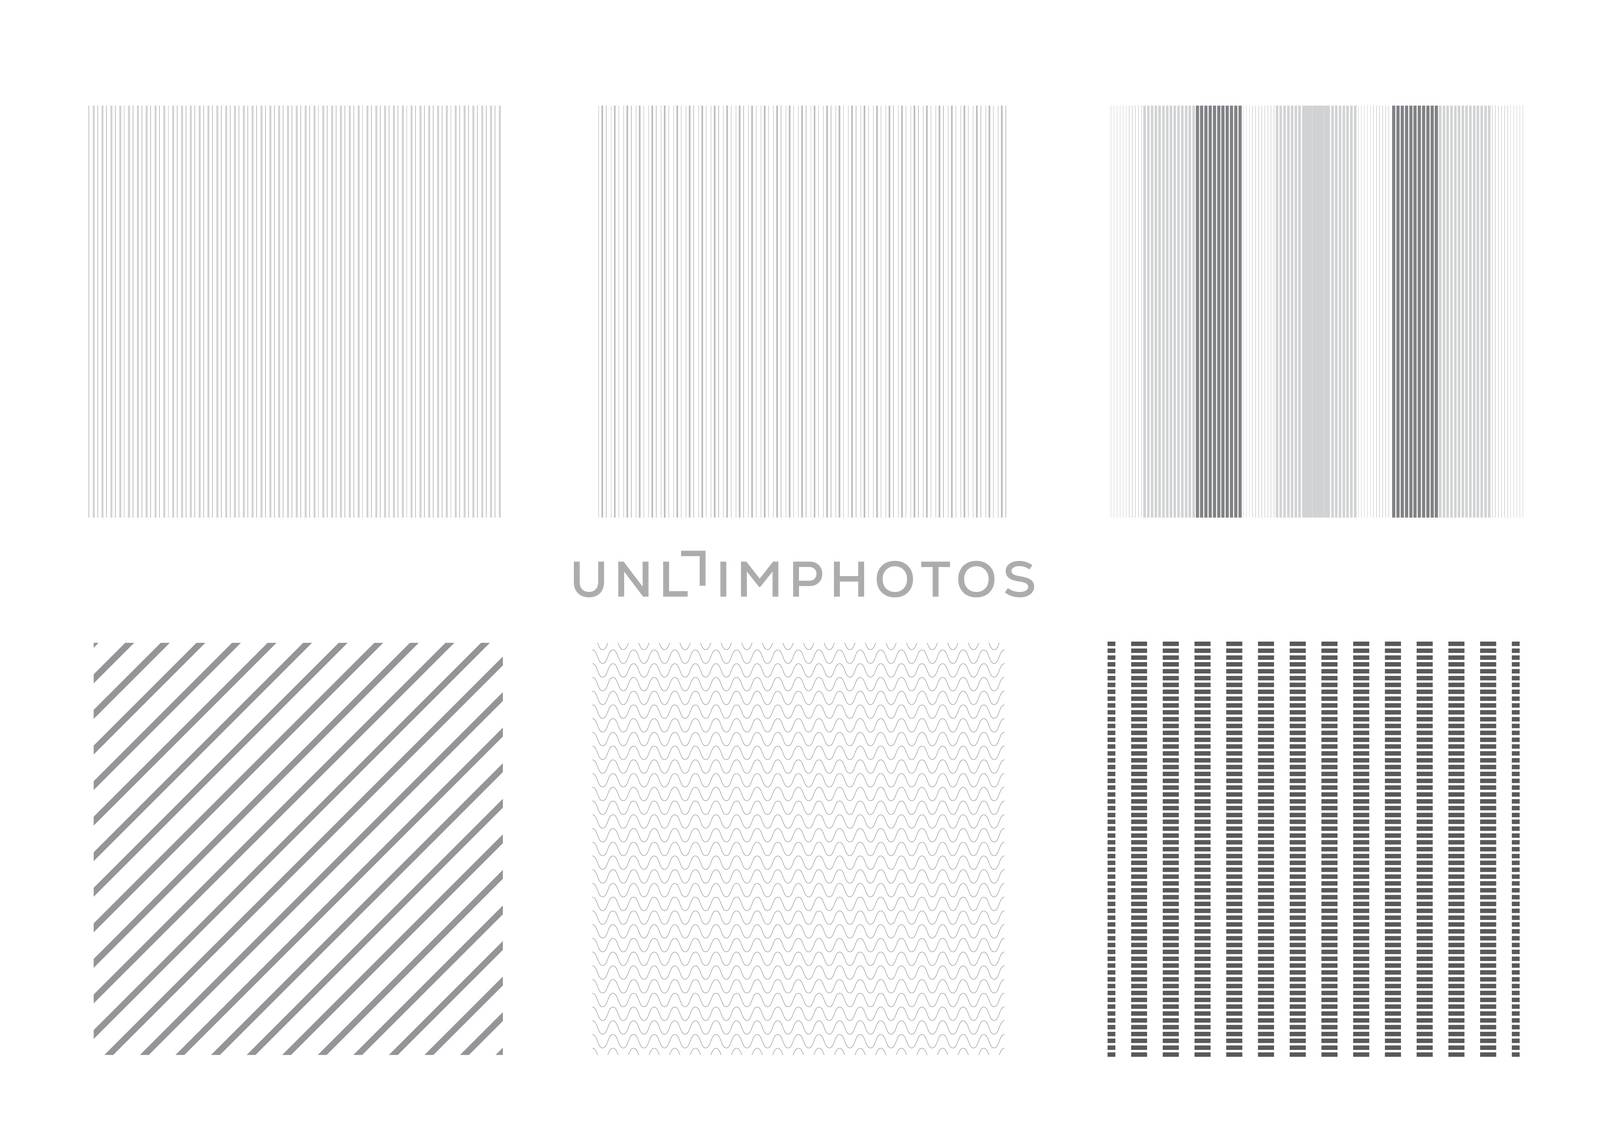  set of abstract line pattern. black and white abstract backgrou by suthee